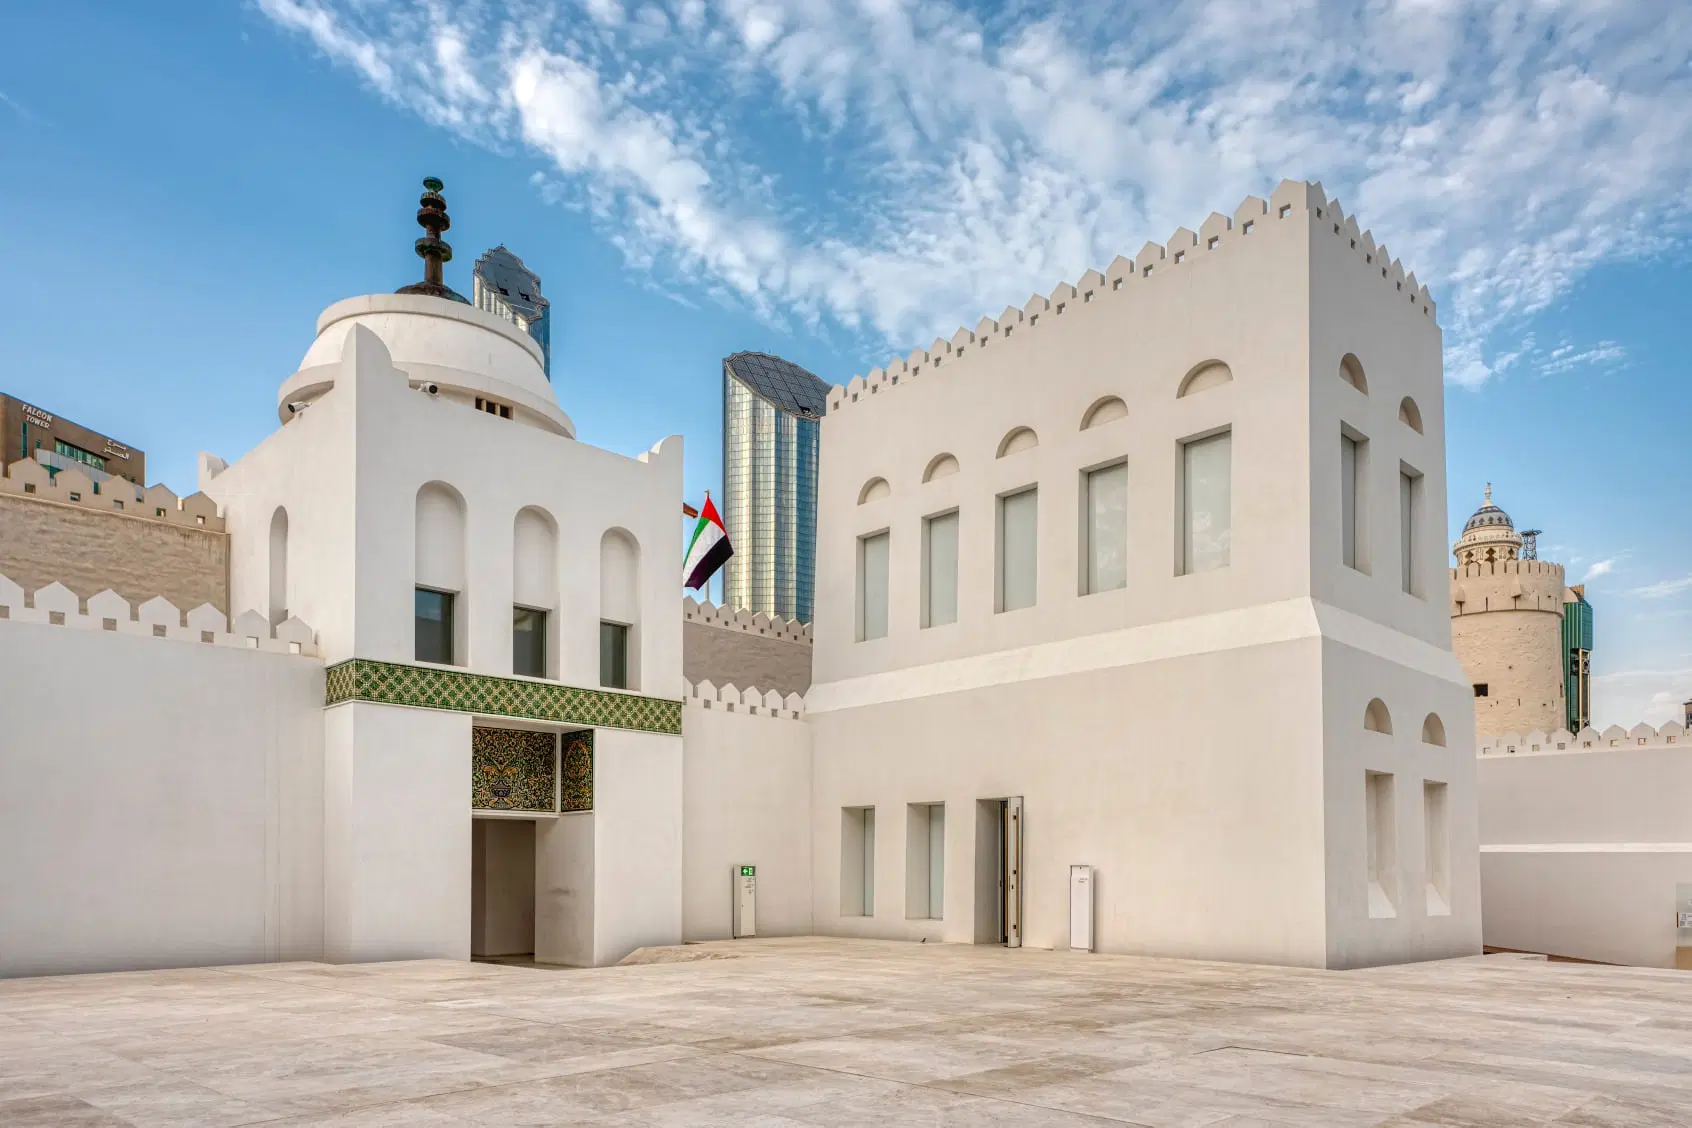 Interesting Facts You Need To Know And Must Do Things At Qasr Al Hosn